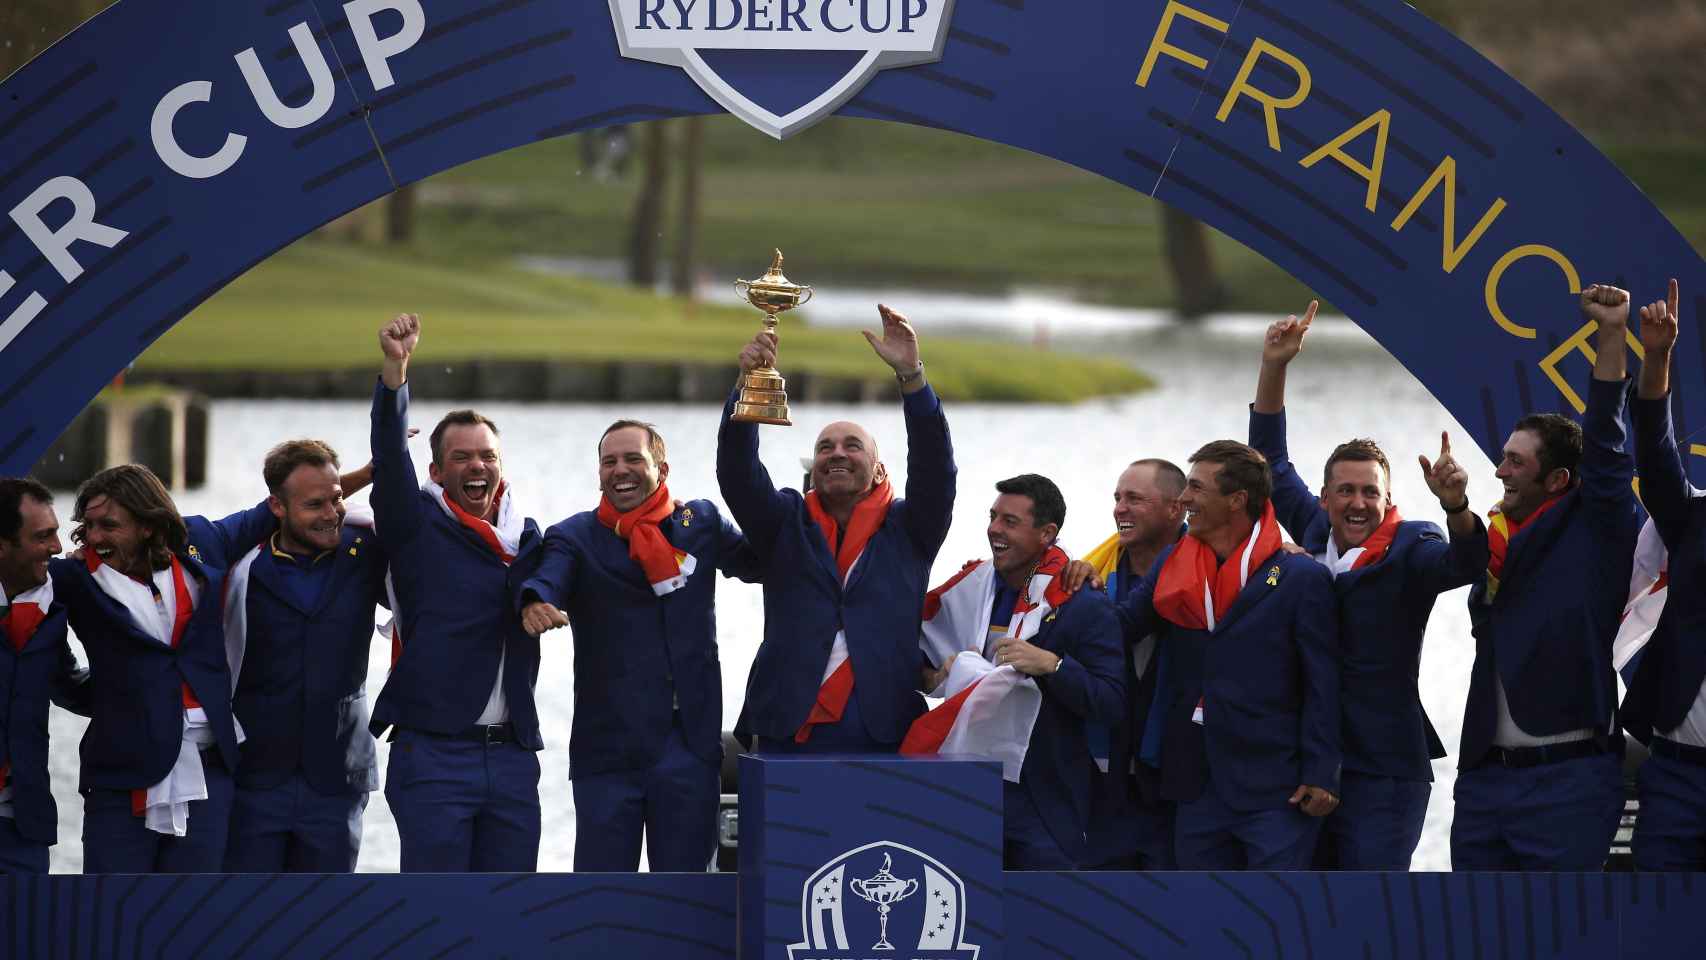 Ryder Cup 2018 - Europe vs USA